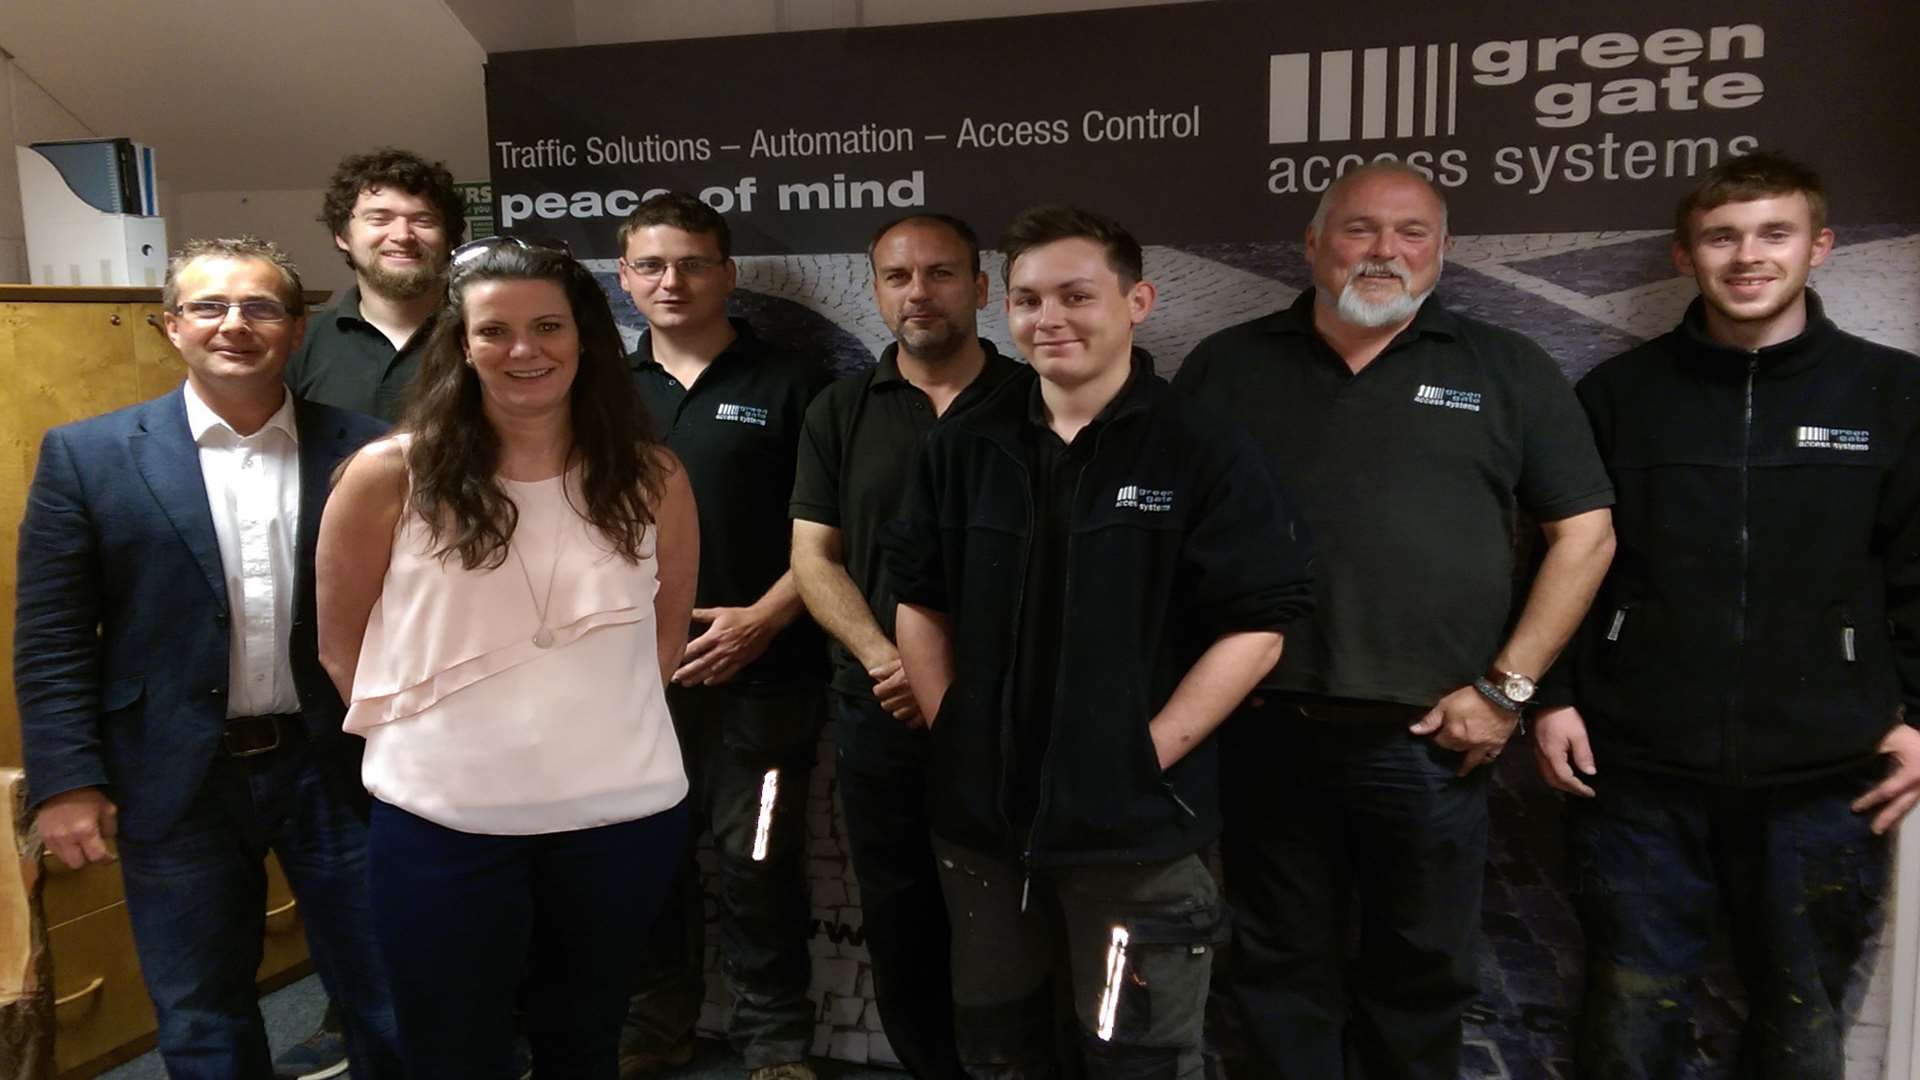 The team at Green Gate Access Systems